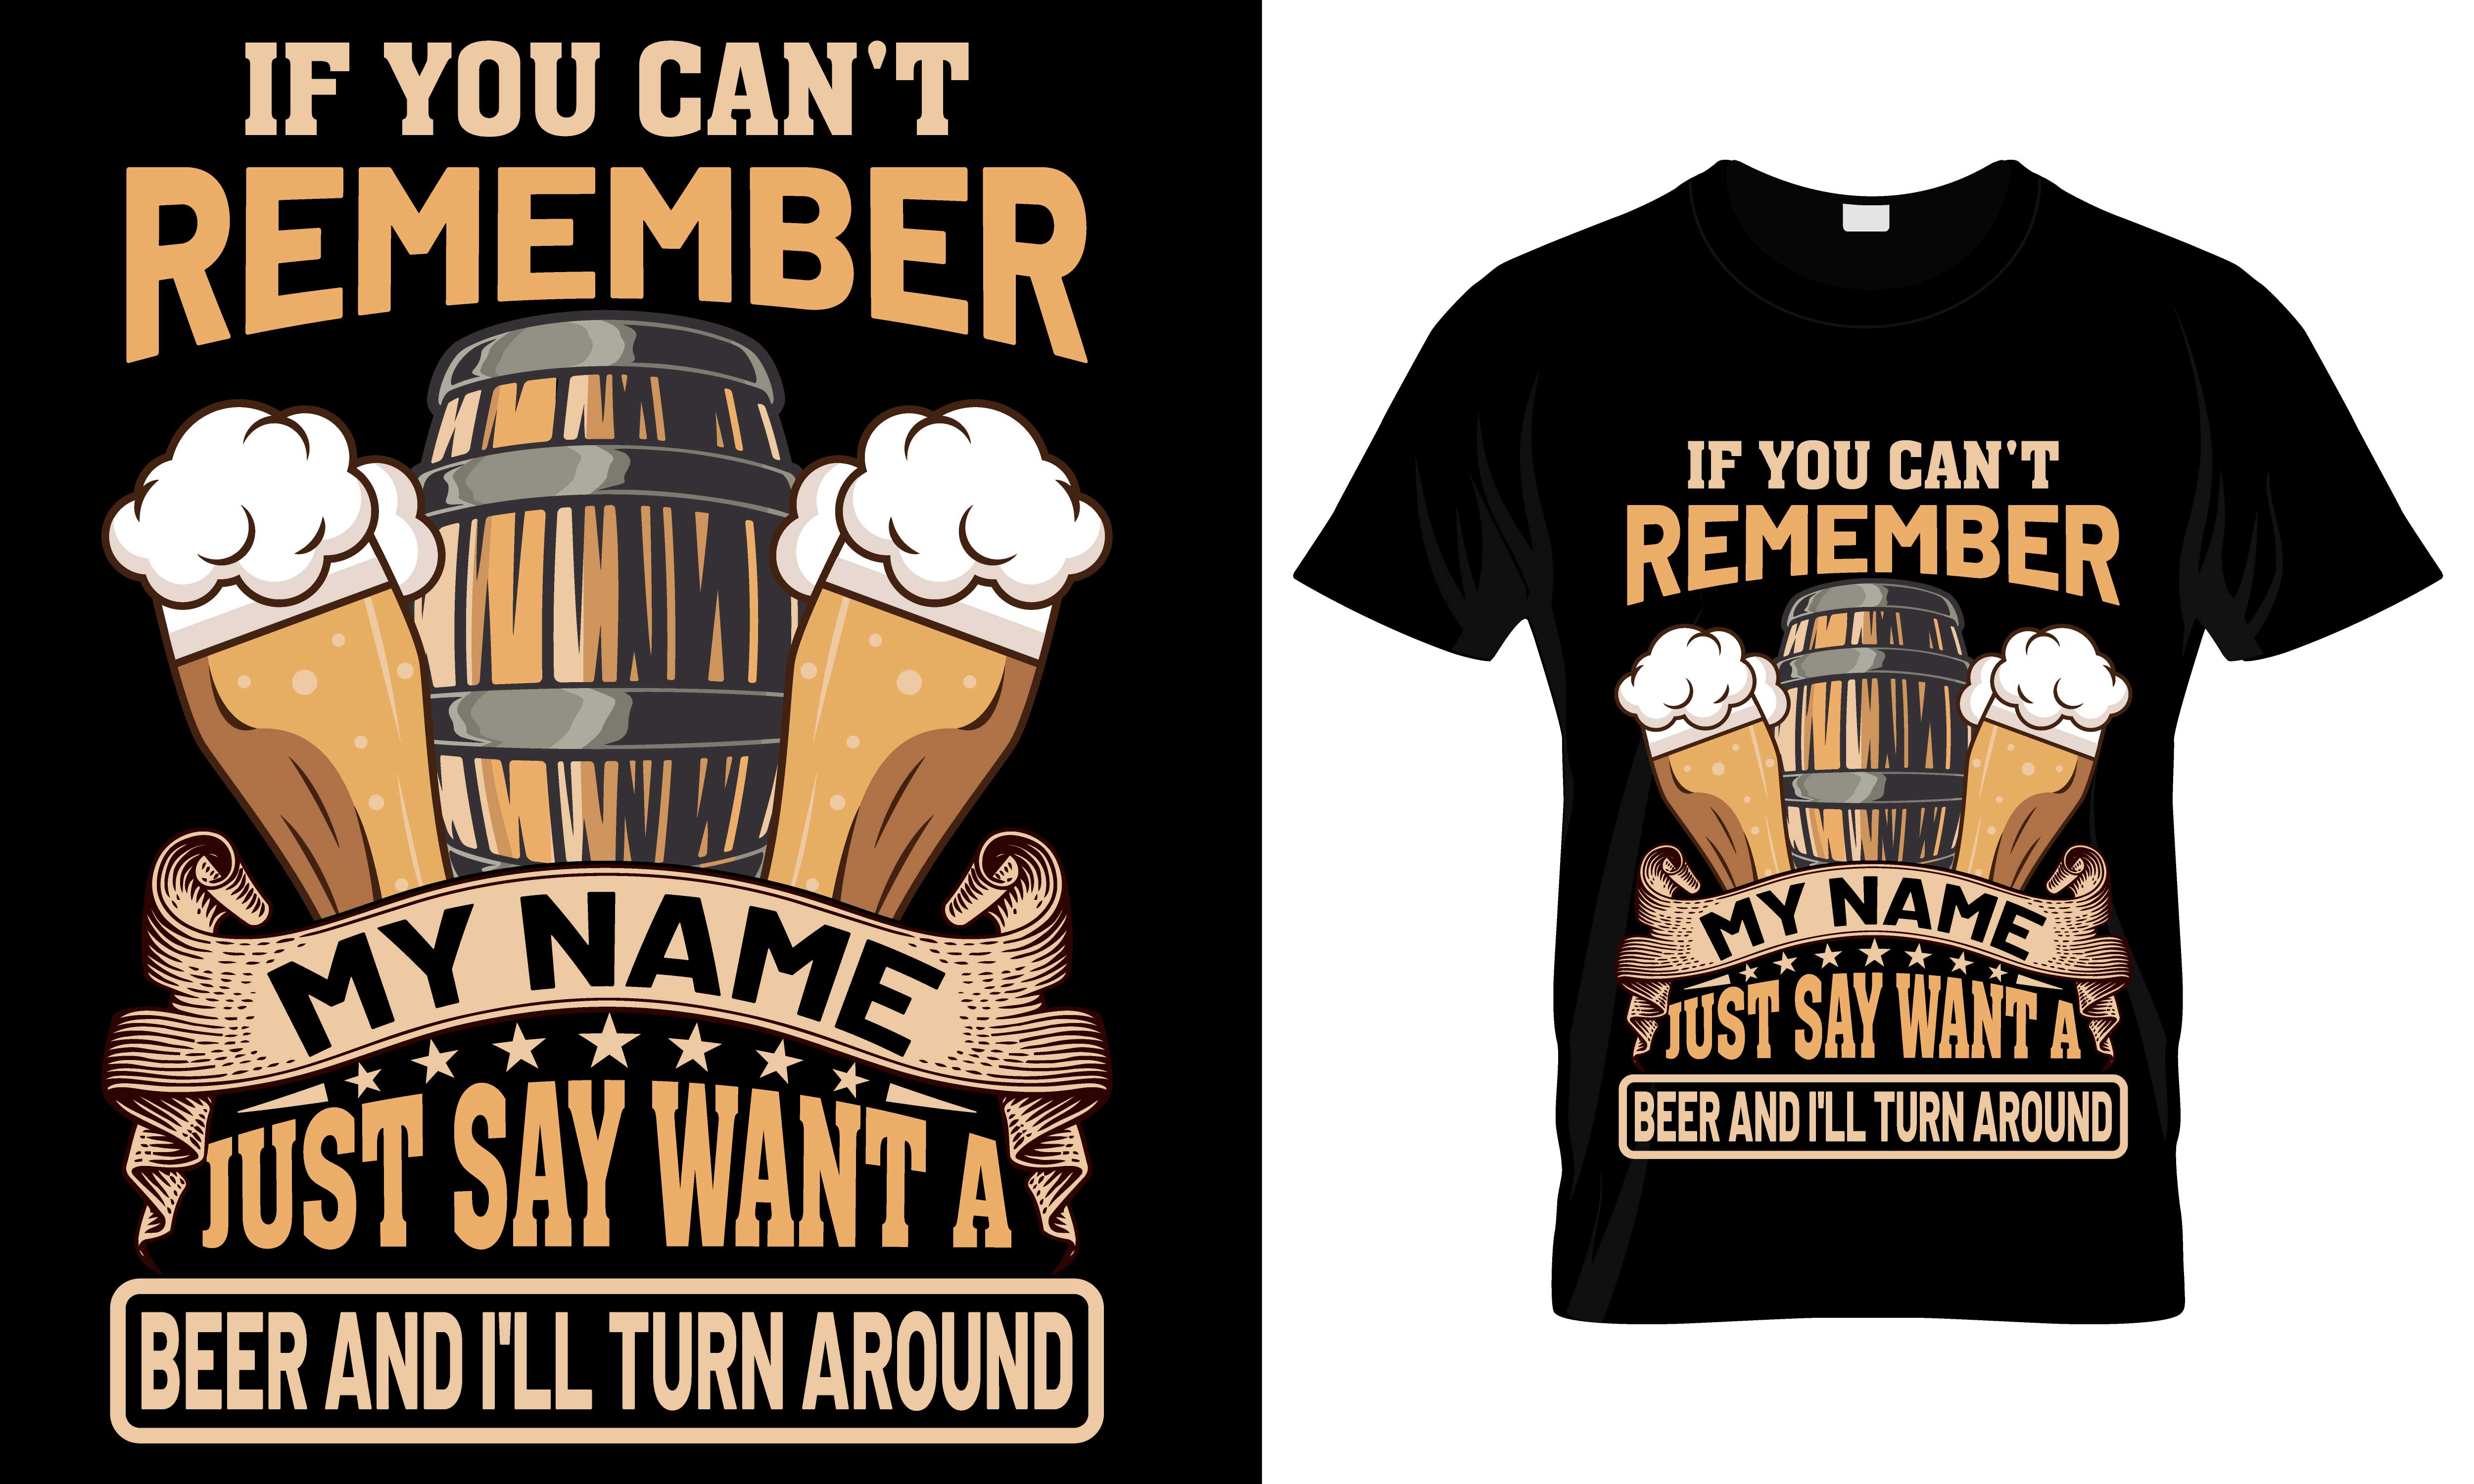 T - shirt that says if you can't remember.